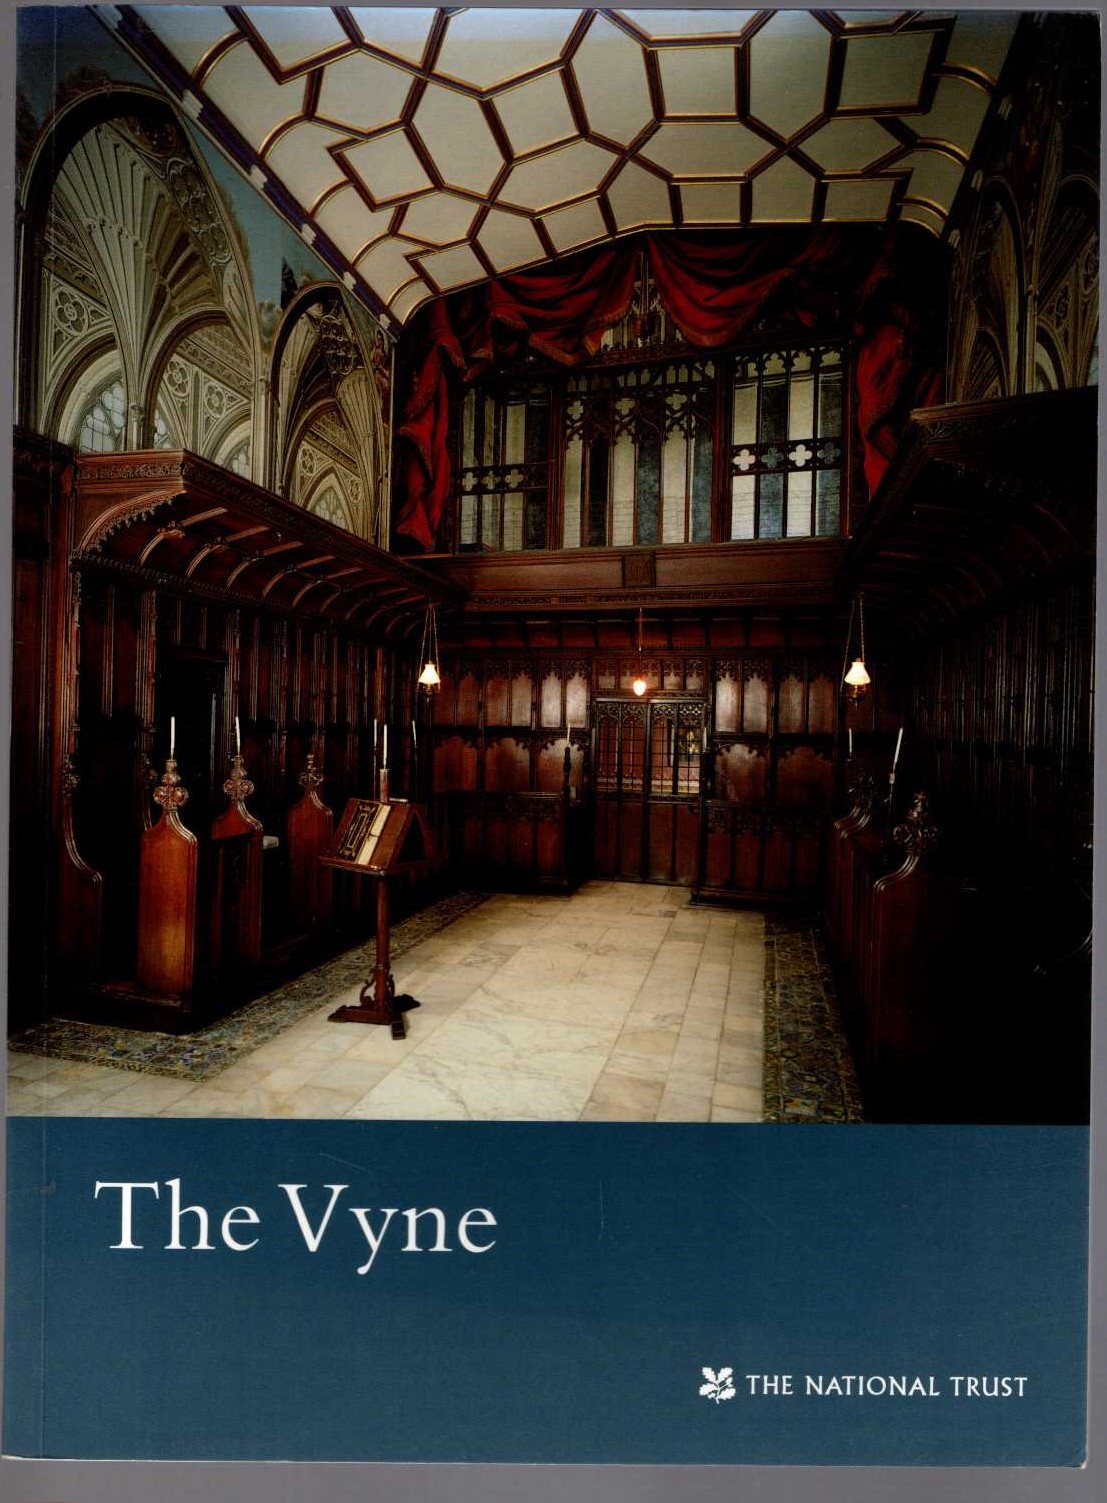 \ THE VYNE by Maurice Howard front book cover image